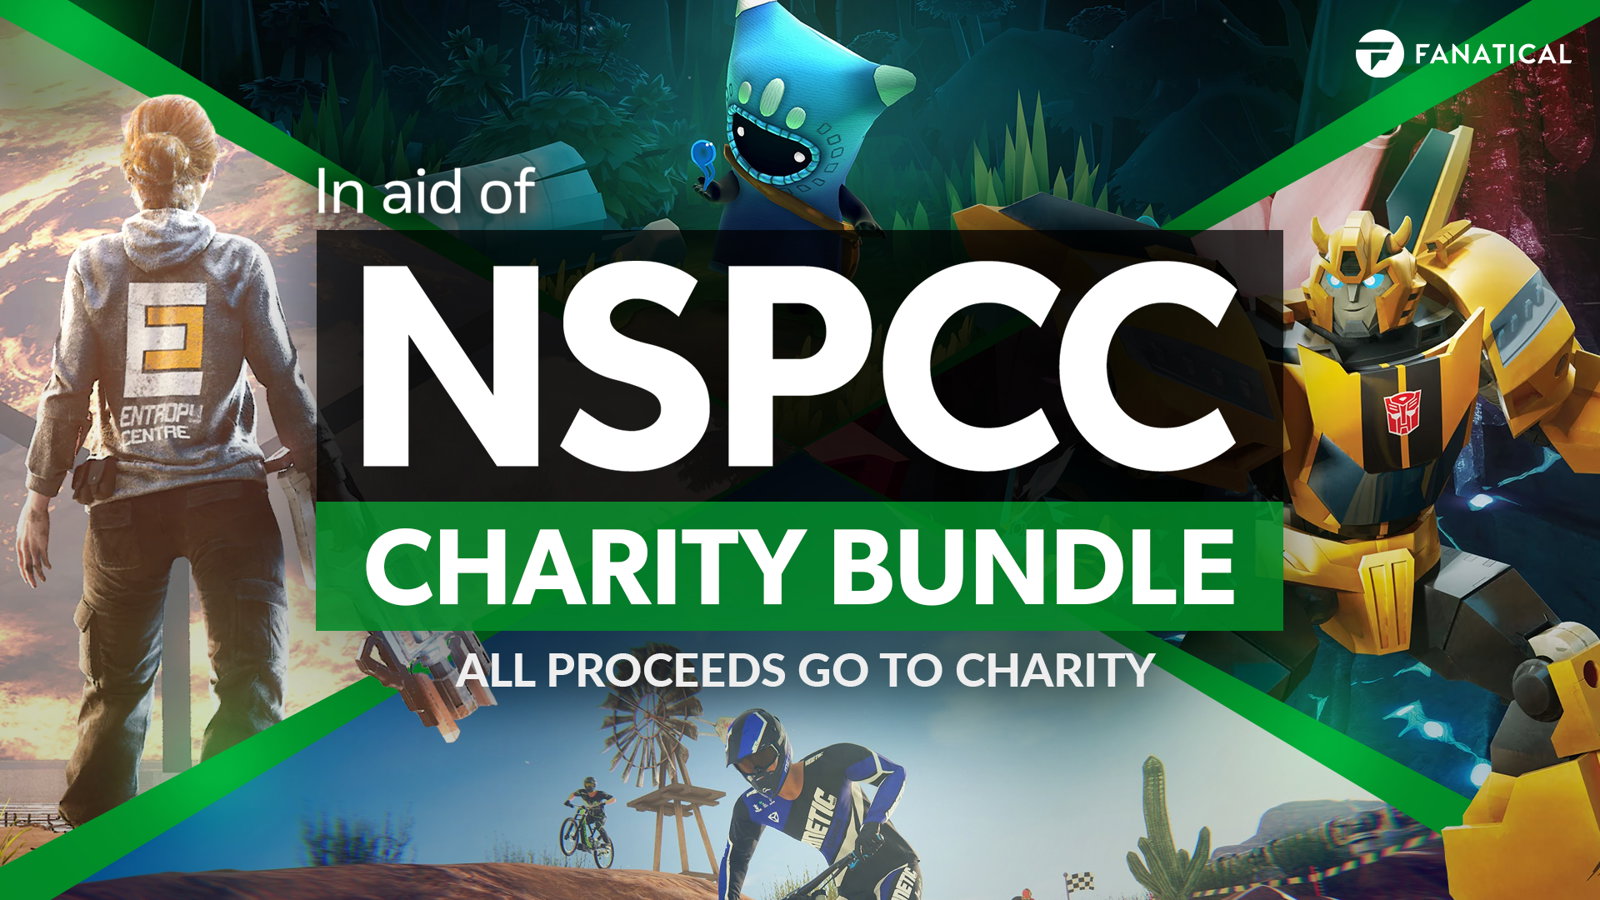 In aid of NSPCC Charity Bundle. All proceeds go to charity.